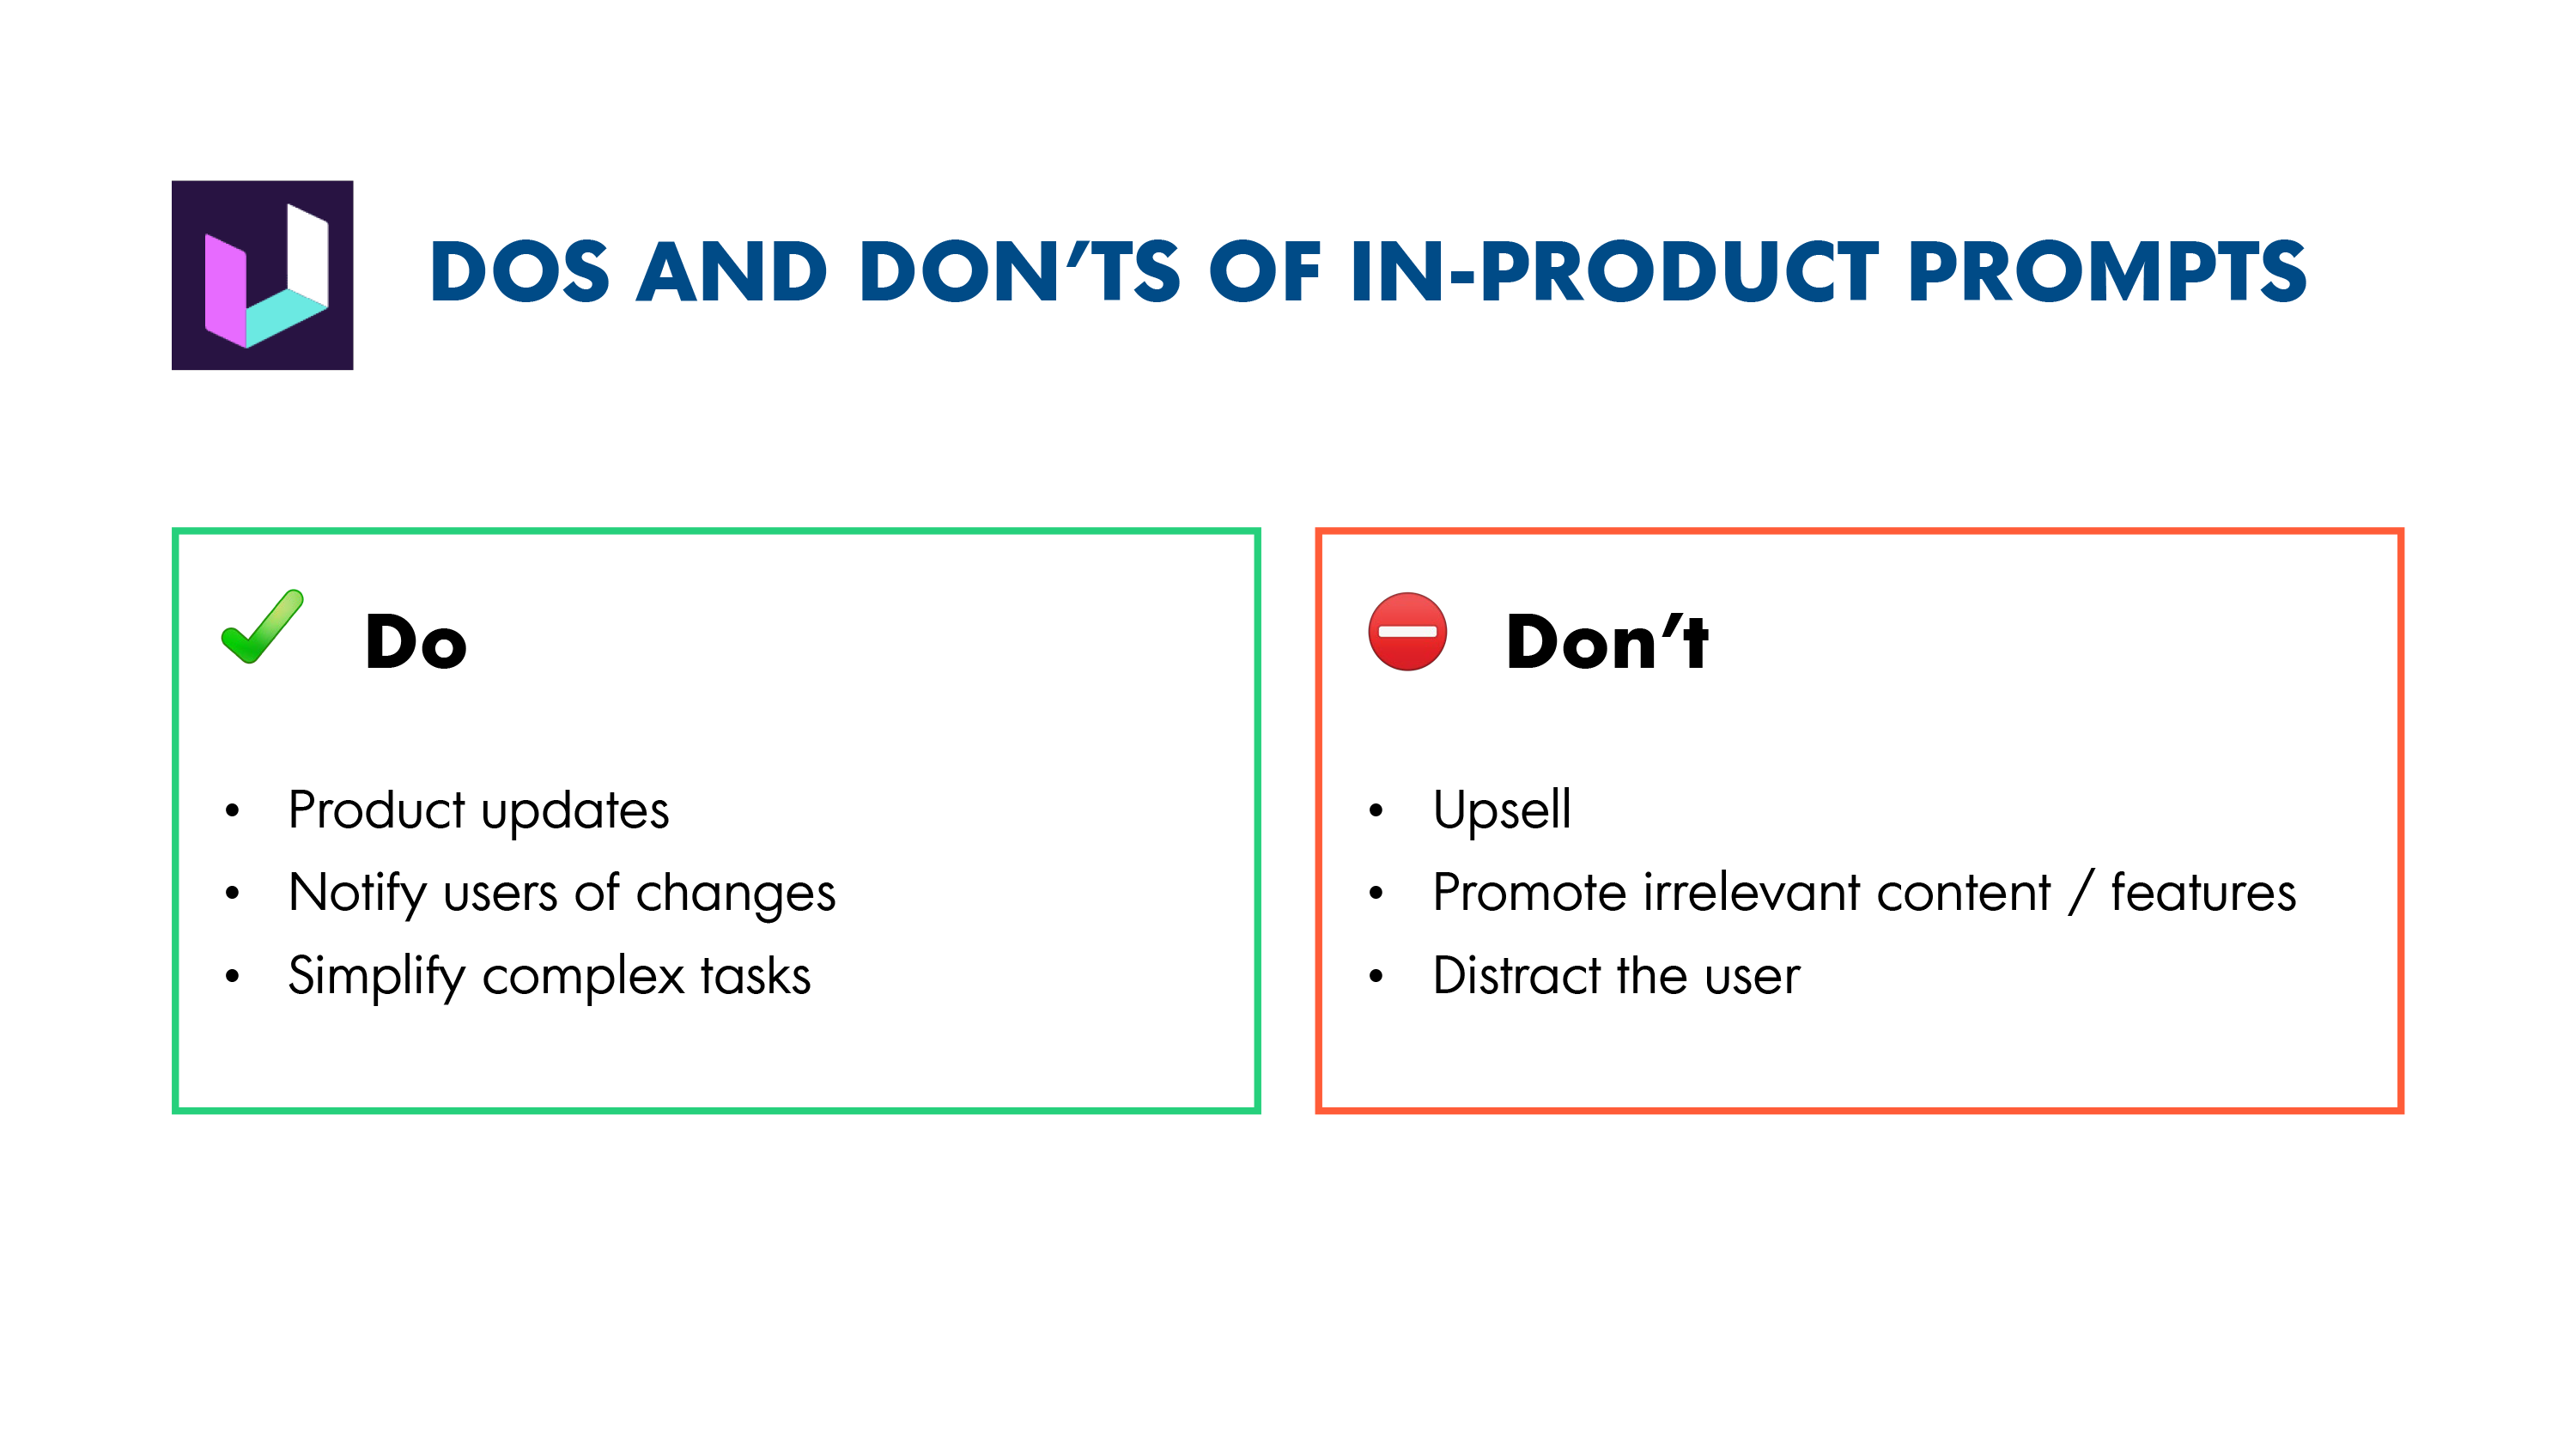 infographic sharing what are best practices for in-product prompts.